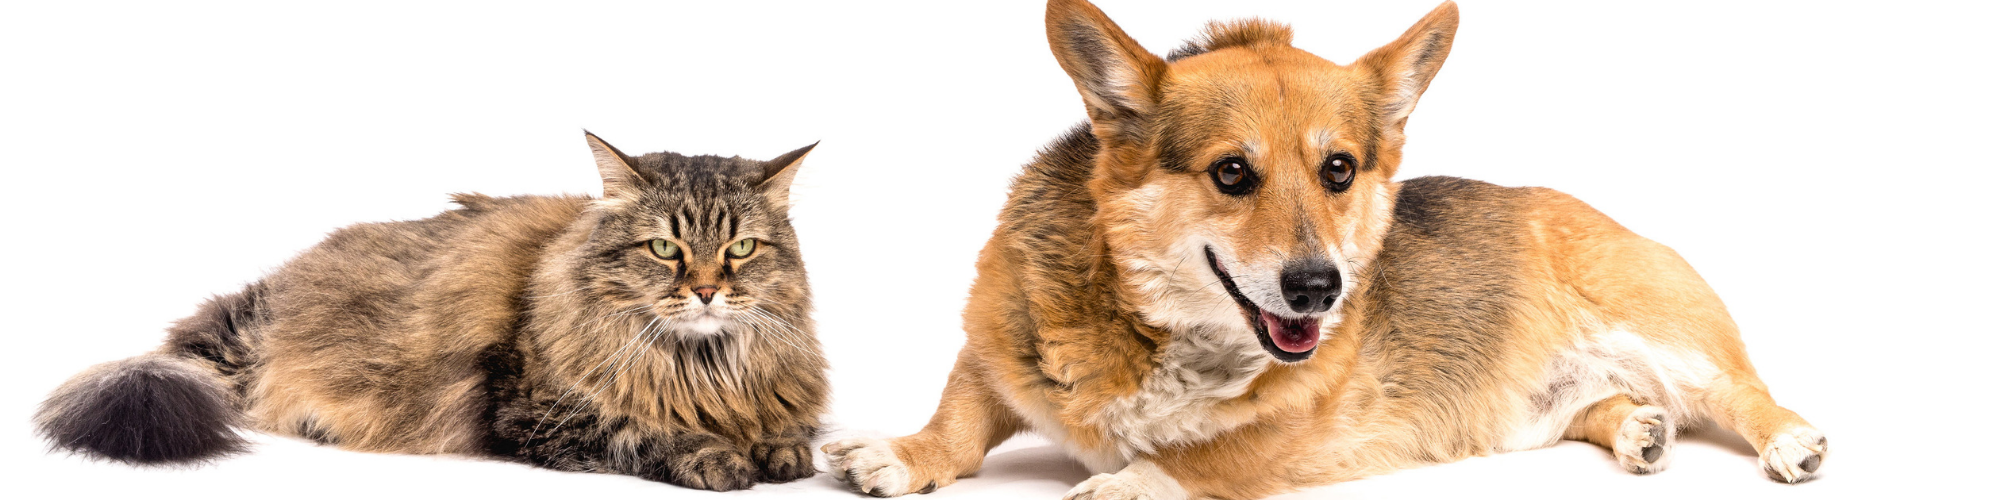 how dogs and cats are different